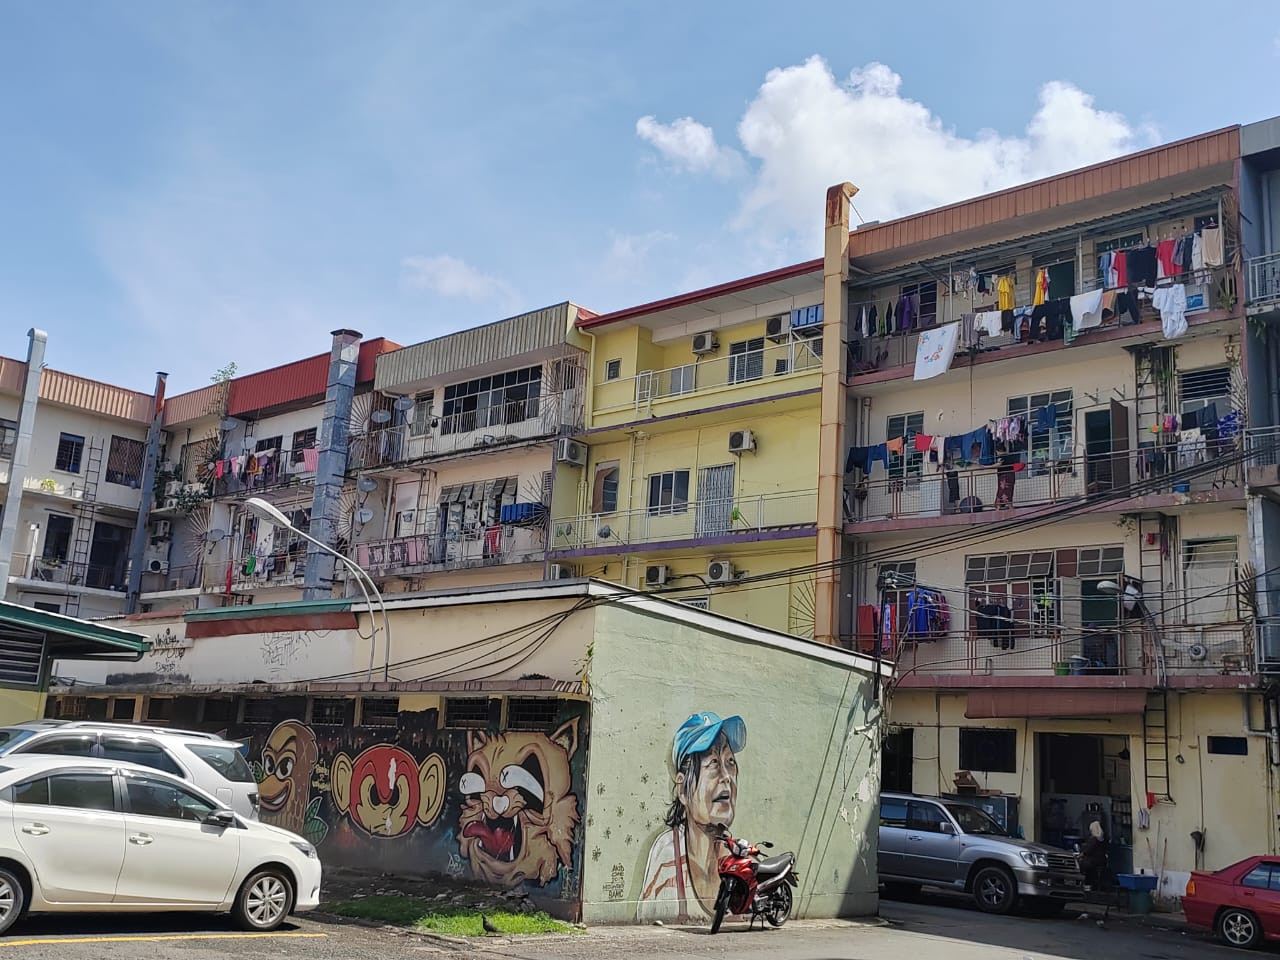 Murals and street art are interwoven with everyday life in KK. – Shazmin Shamsuddin pic